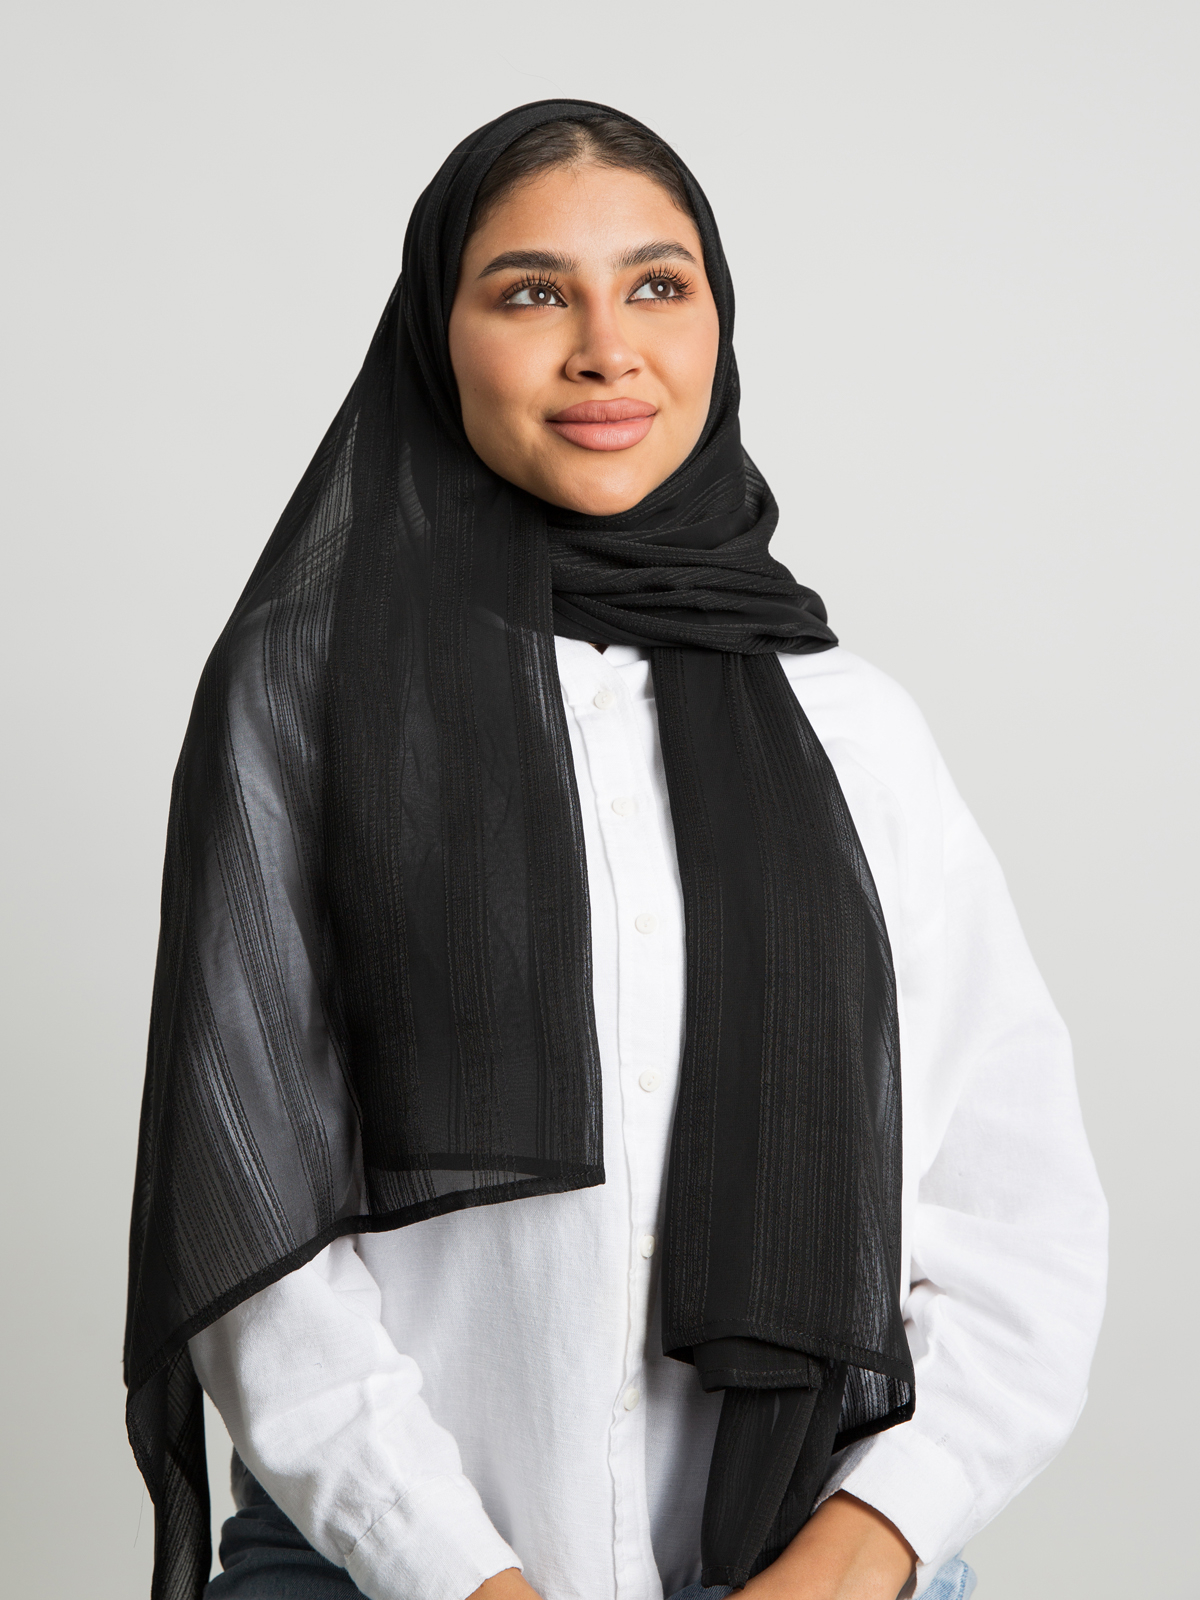 Black plain bundled stripes soft chiffon laser tarha by kaafmeem hijab for daily wear available in multiple colors